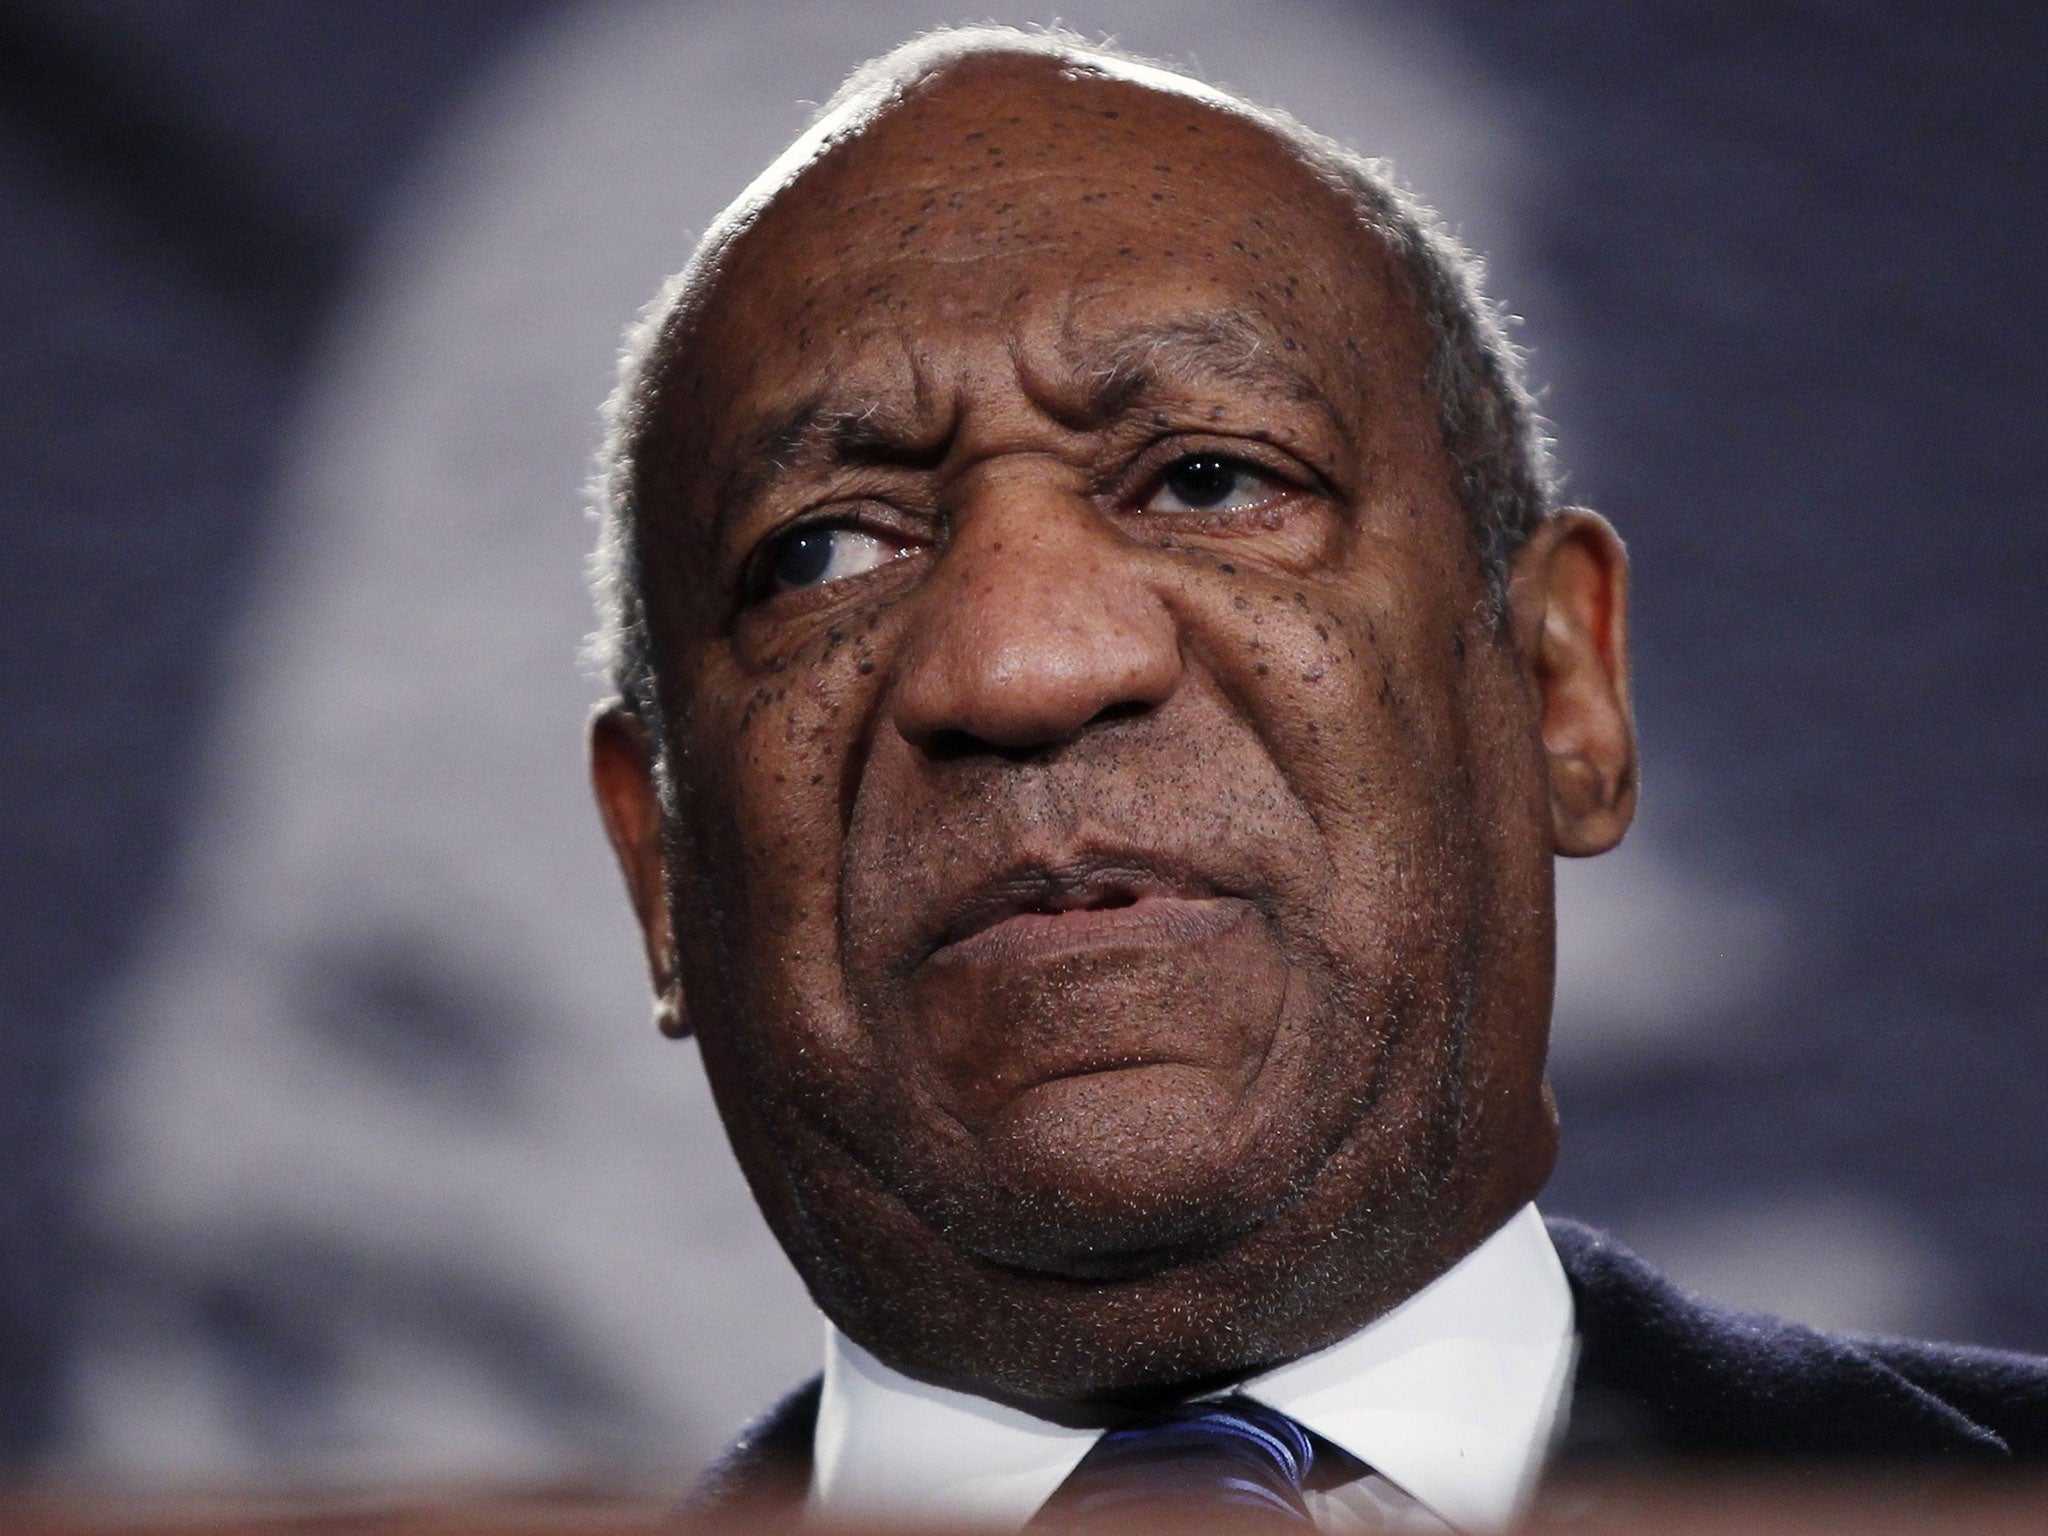 Prosecutors have issued an arrest warrant for Bill Cosby